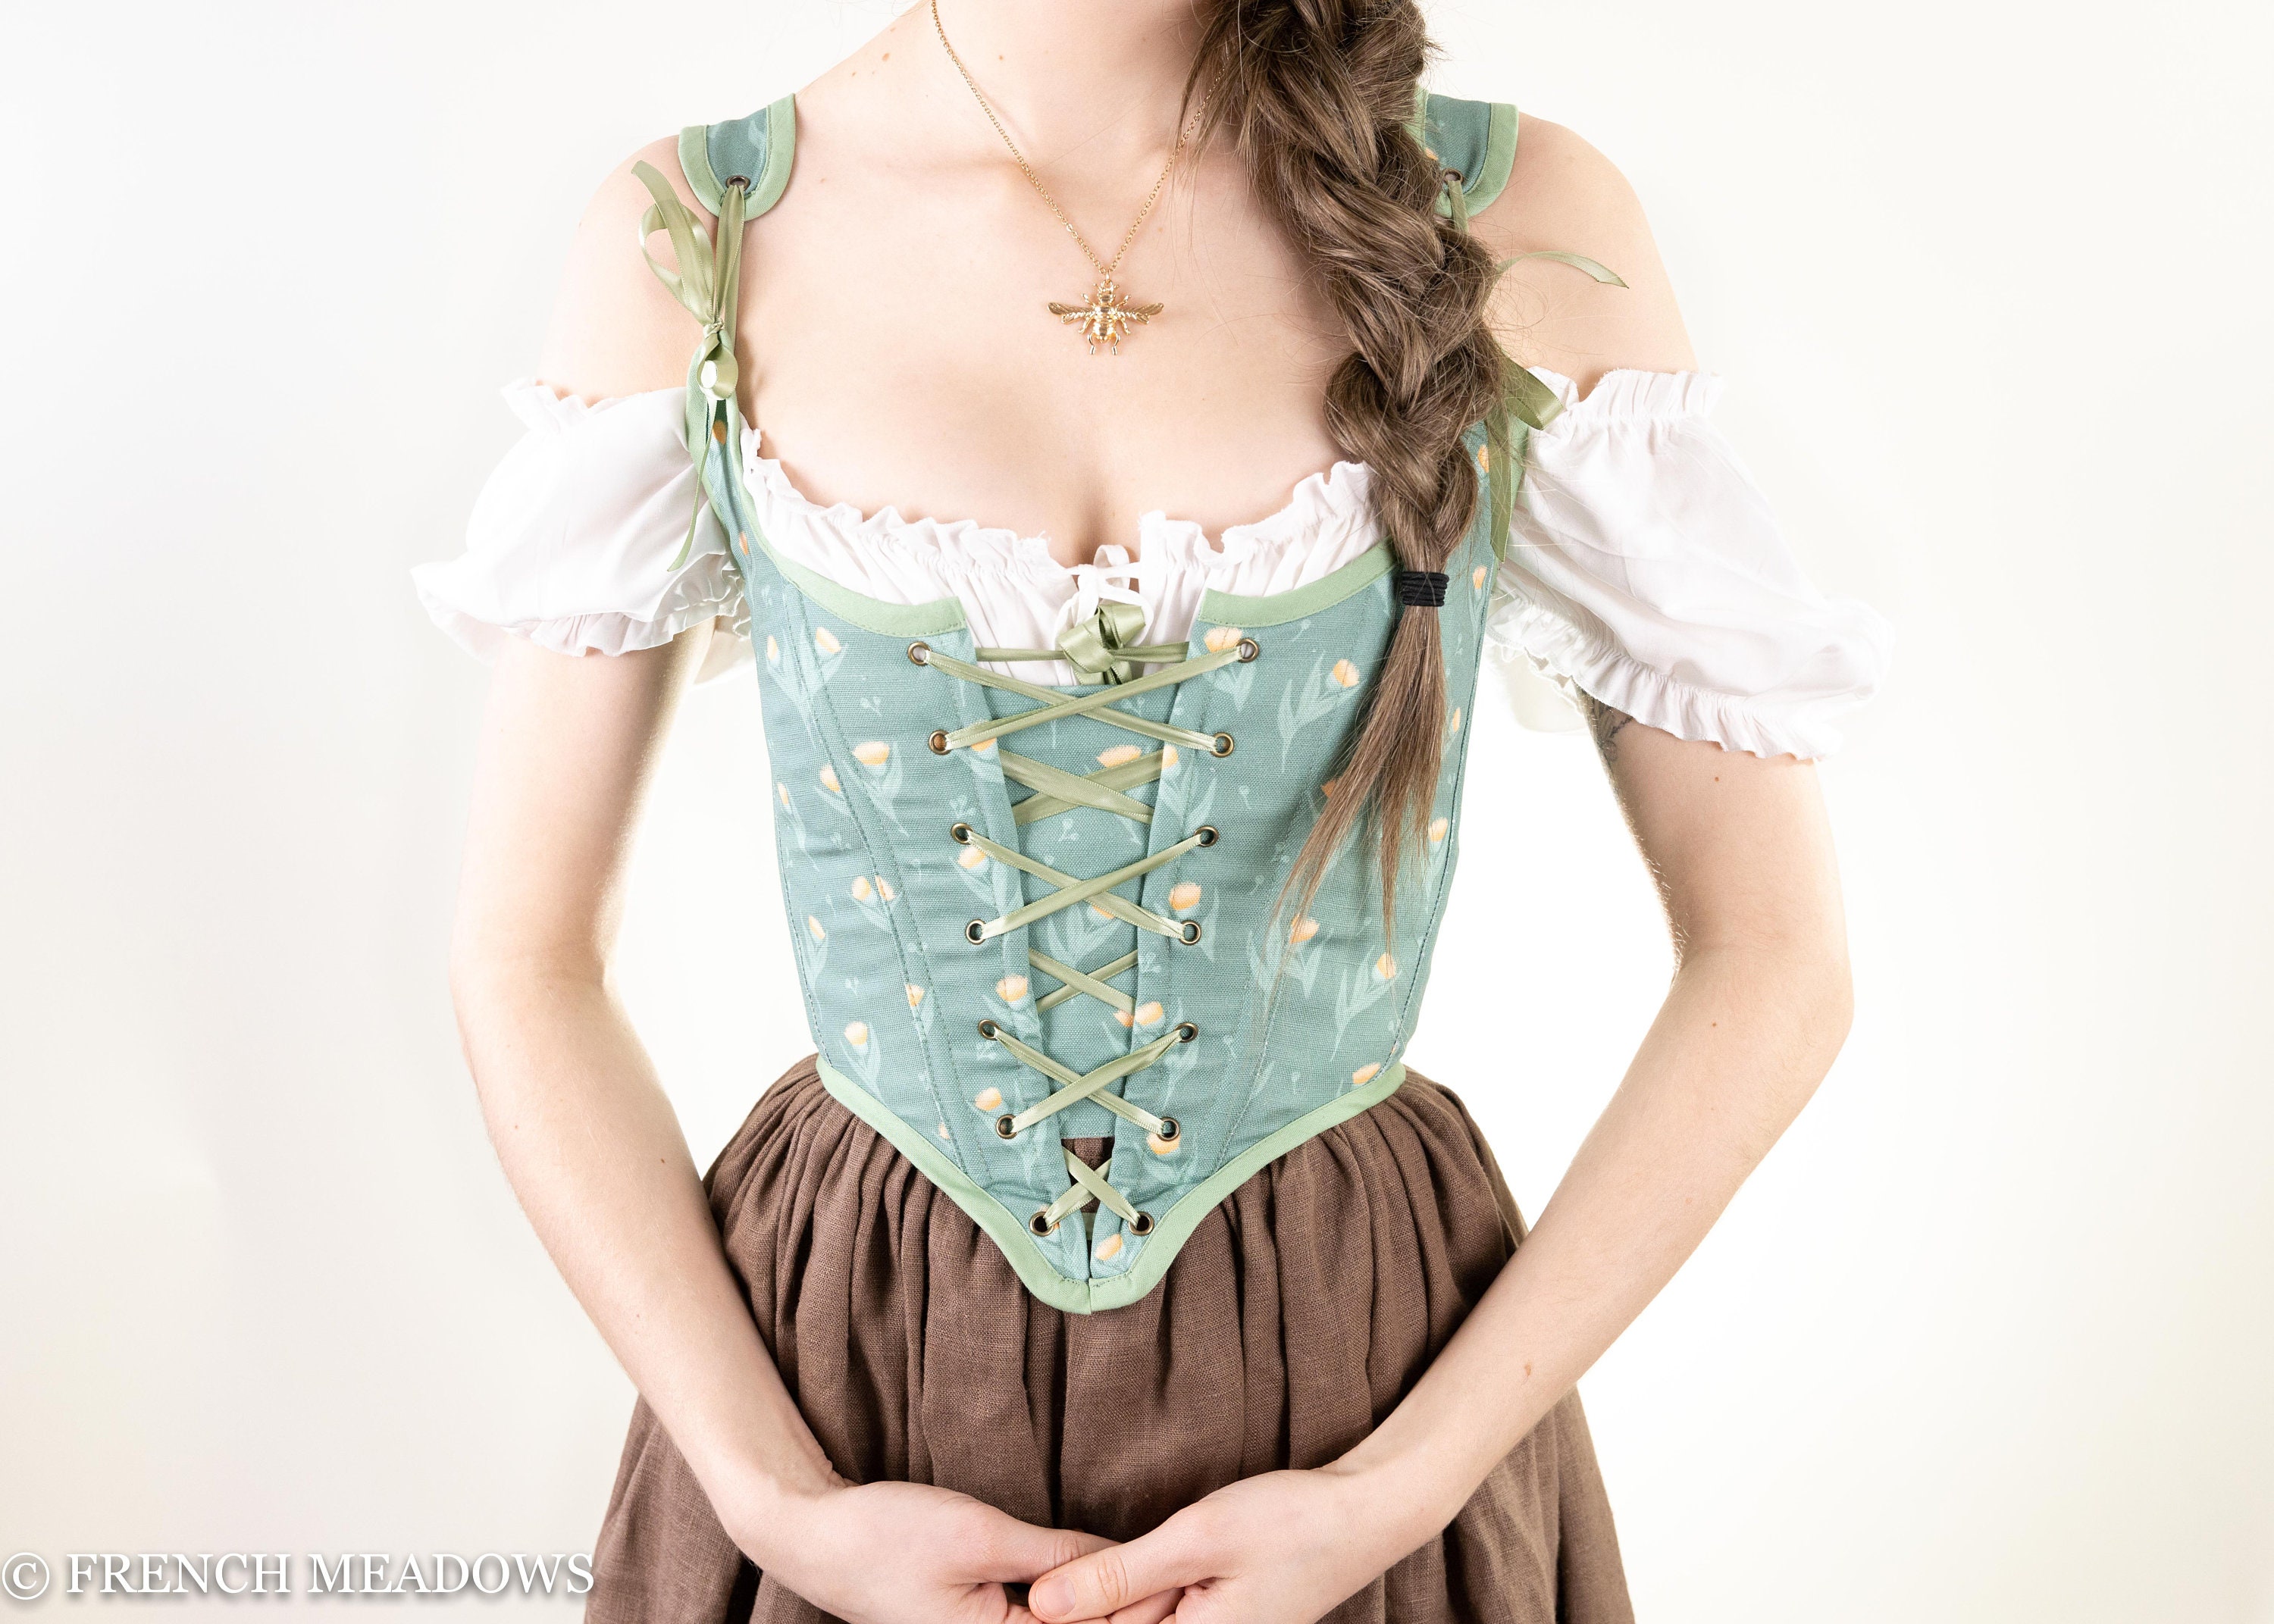 Renaissance Corset Bodice Stays in Mint Green Floral Corset Top